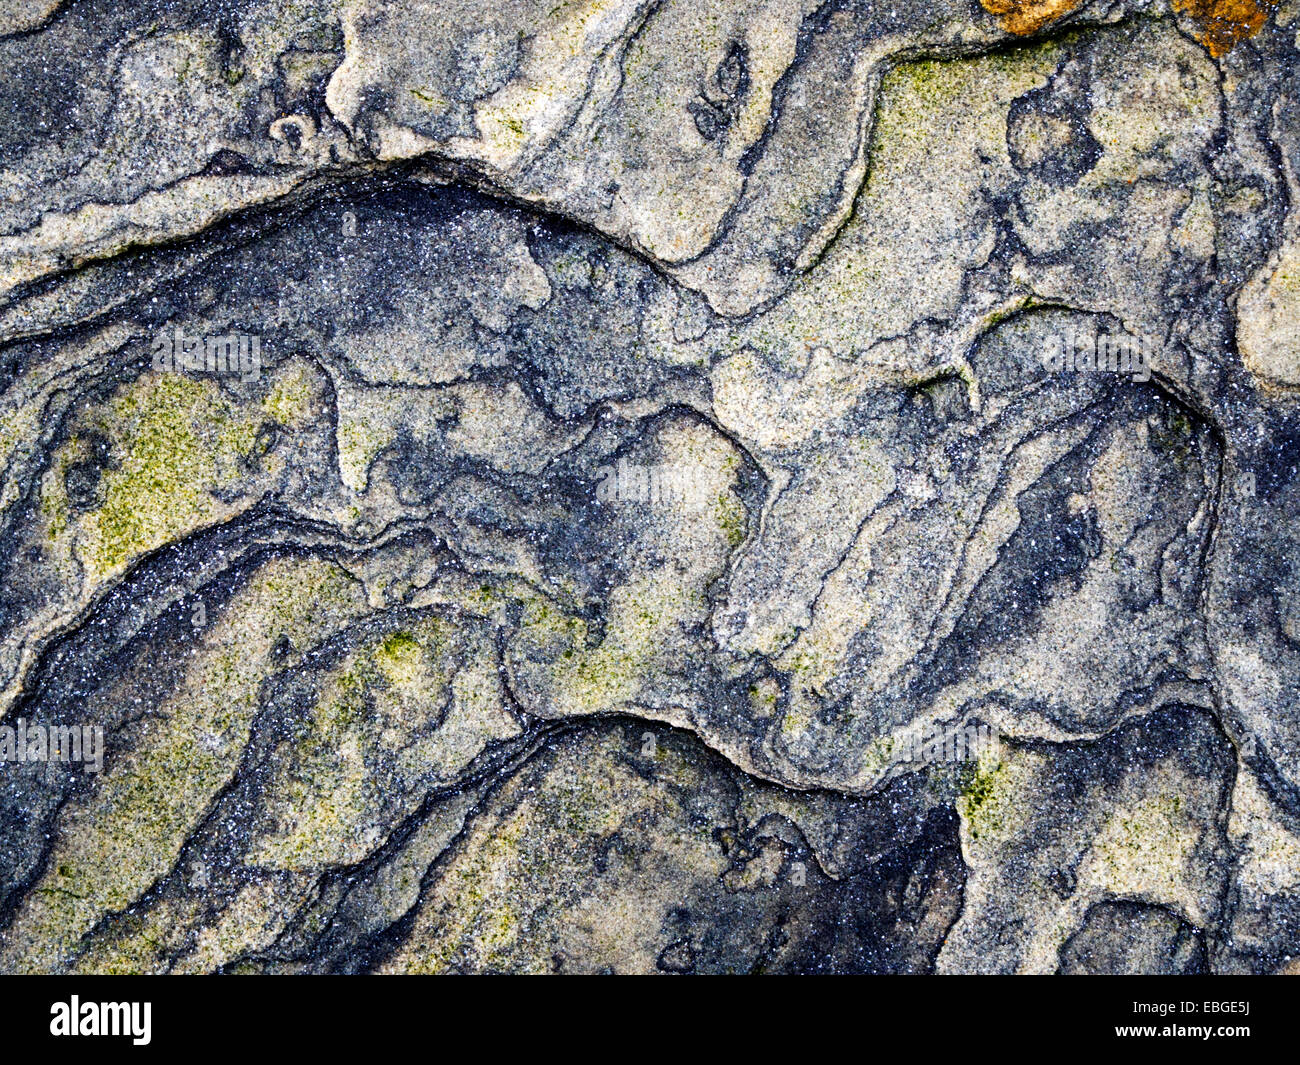 Rock Detail on the Beach at Amble by the Sea Northumberland Coast England Stock Photo